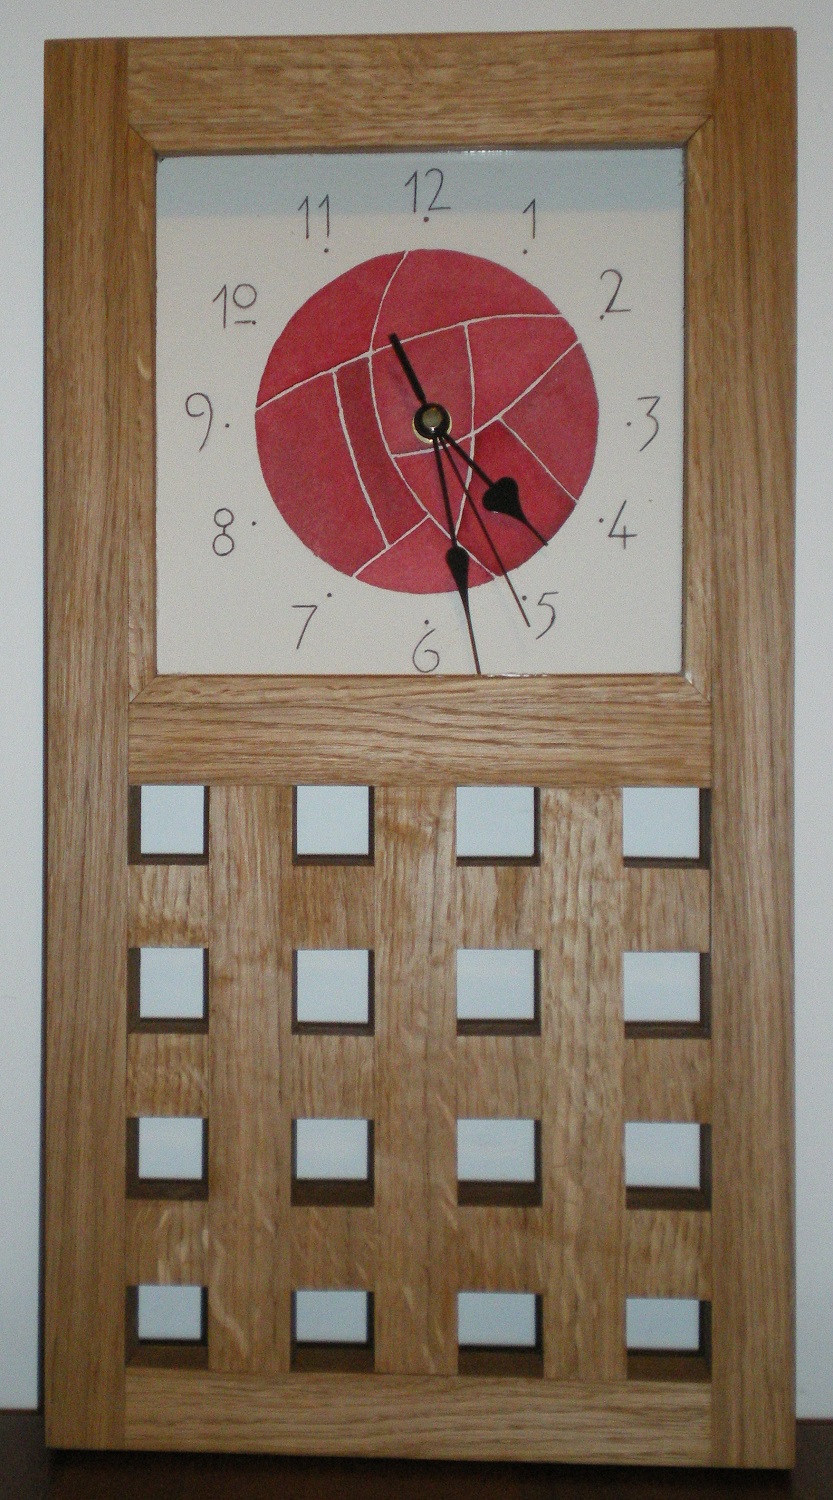 This Mackintosh style large lattice clock was commissioned for a Ruby Wedding and has a painted face based i=on the Mackintosh rose motif